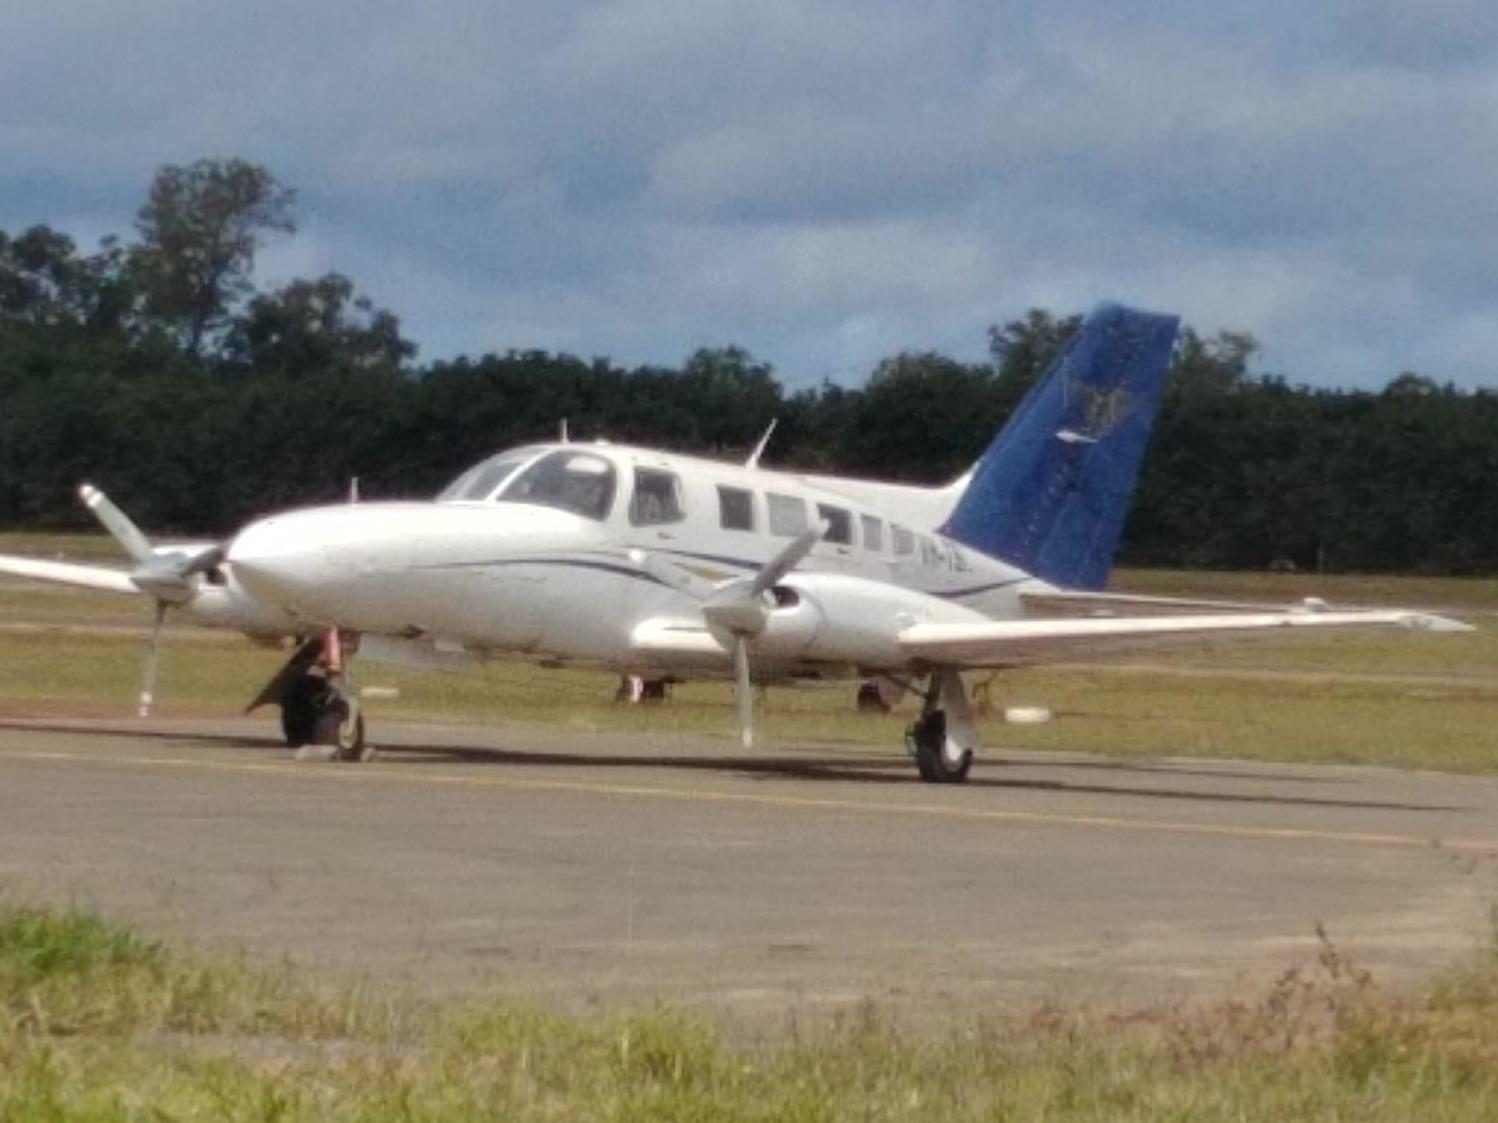 The Cessna light aircraft used by the alleged drug smugglers.